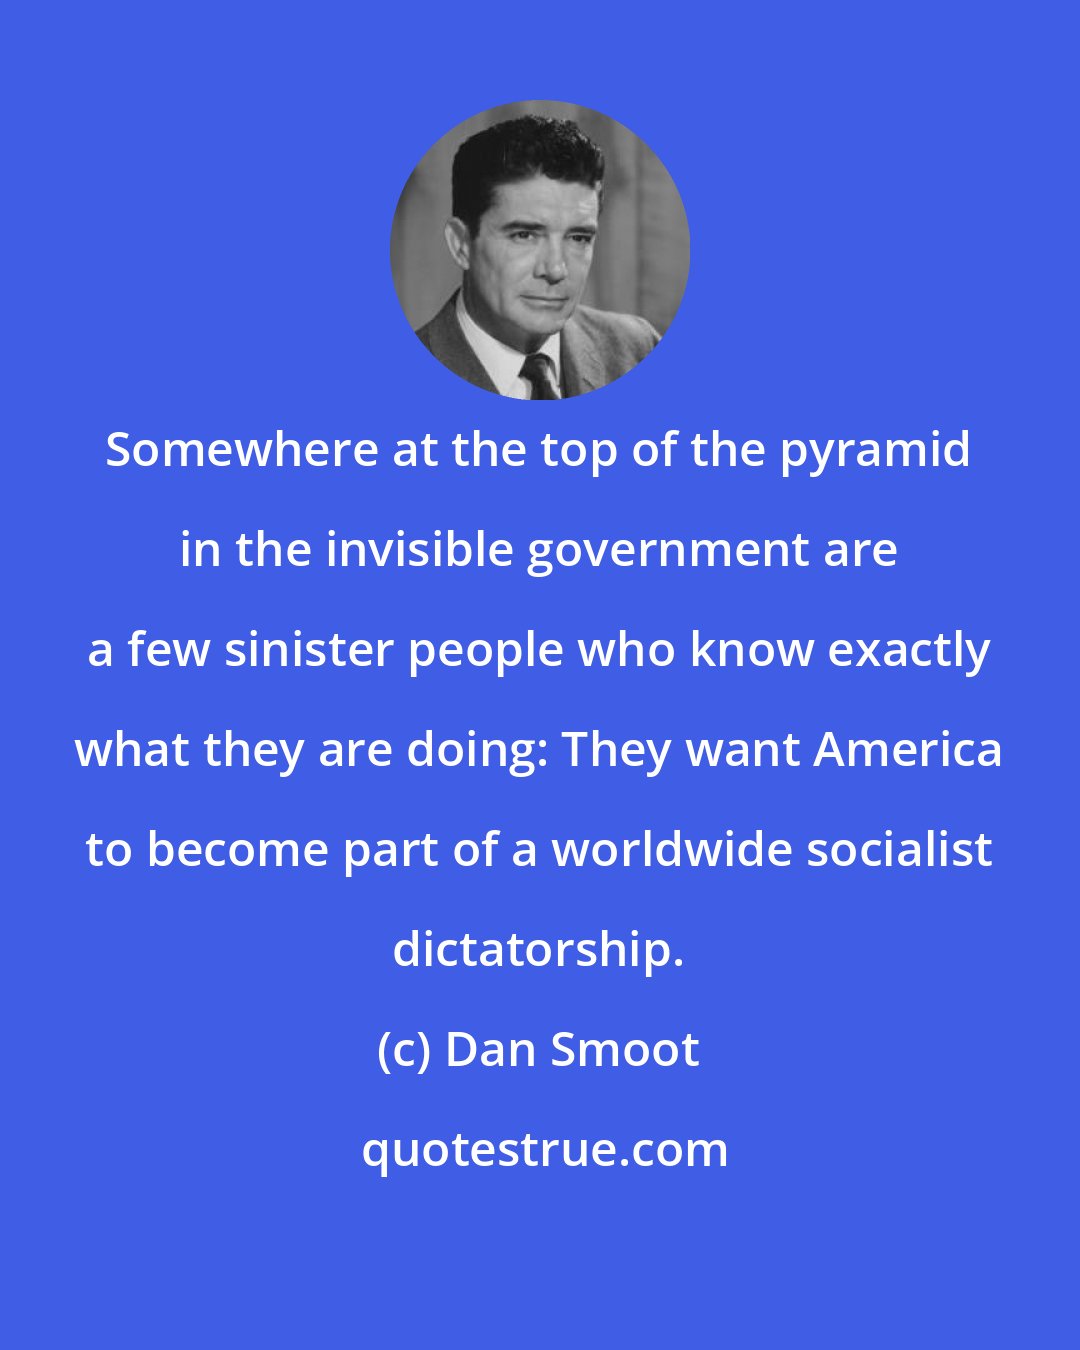 Dan Smoot: Somewhere at the top of the pyramid in the invisible government are a few sinister people who know exactly what they are doing: They want America to become part of a worldwide socialist dictatorship.